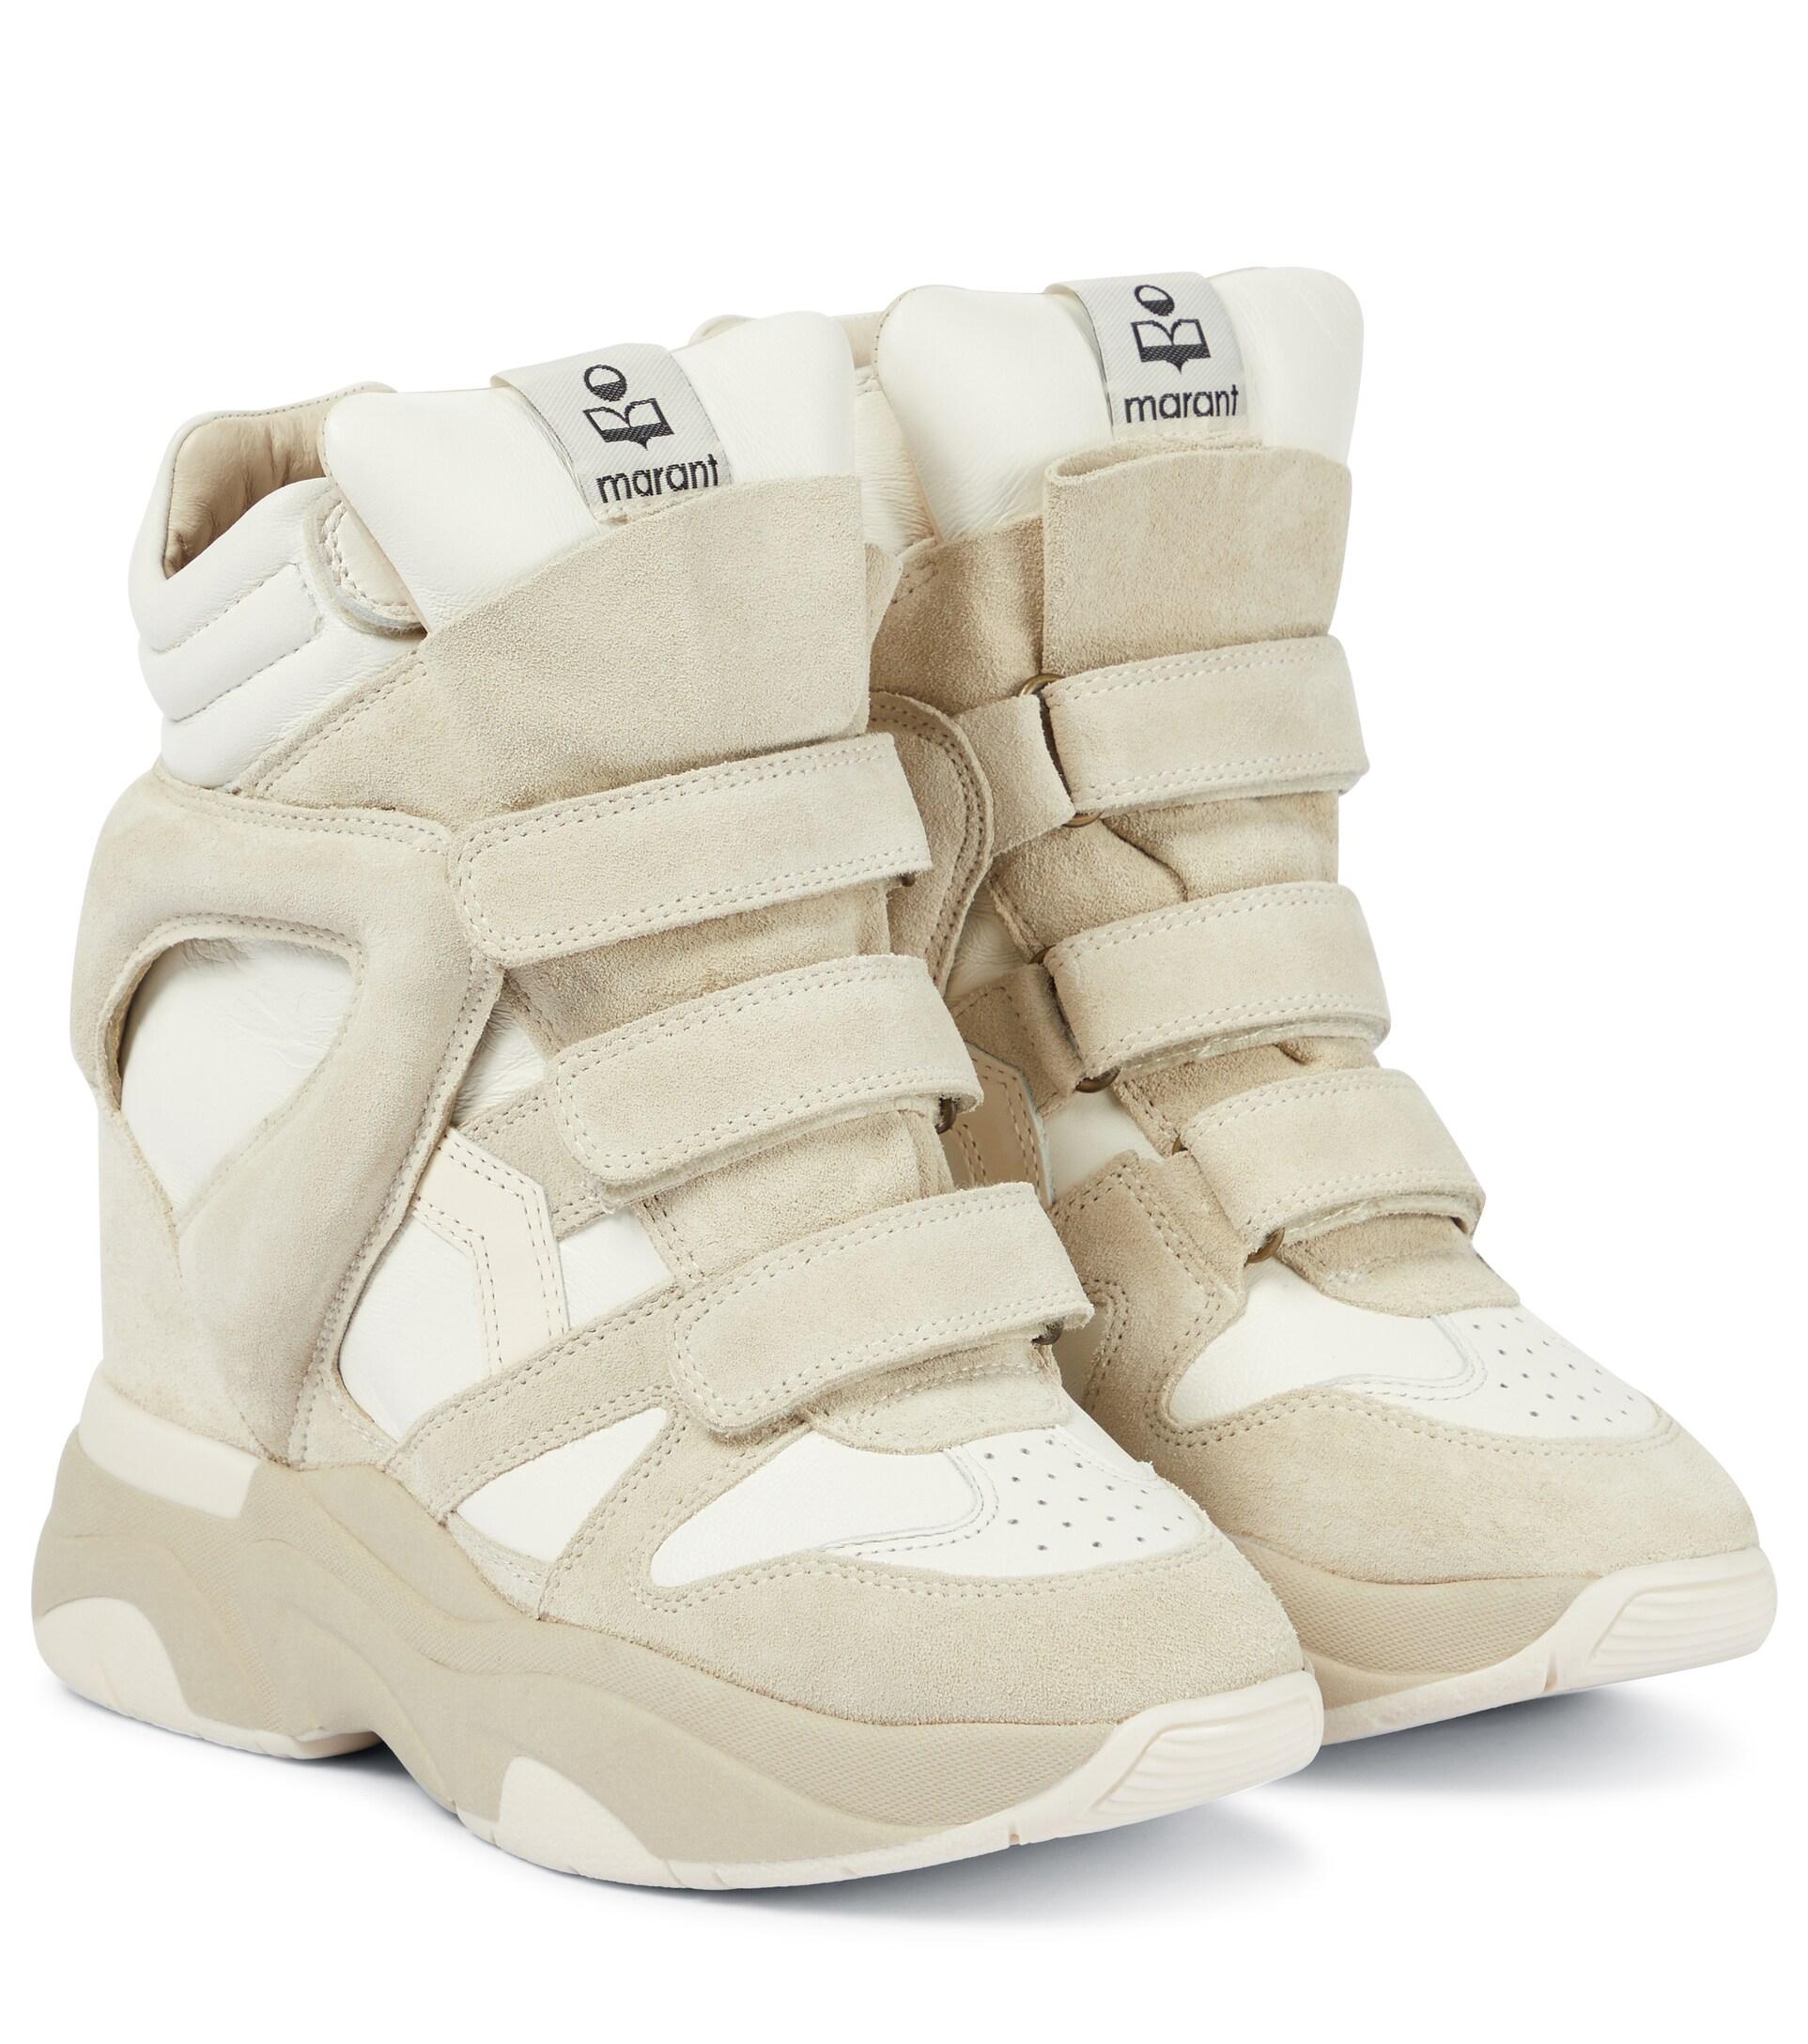 Isabel Marant Balskee Leather Wedge Sneakers in White | Lyst